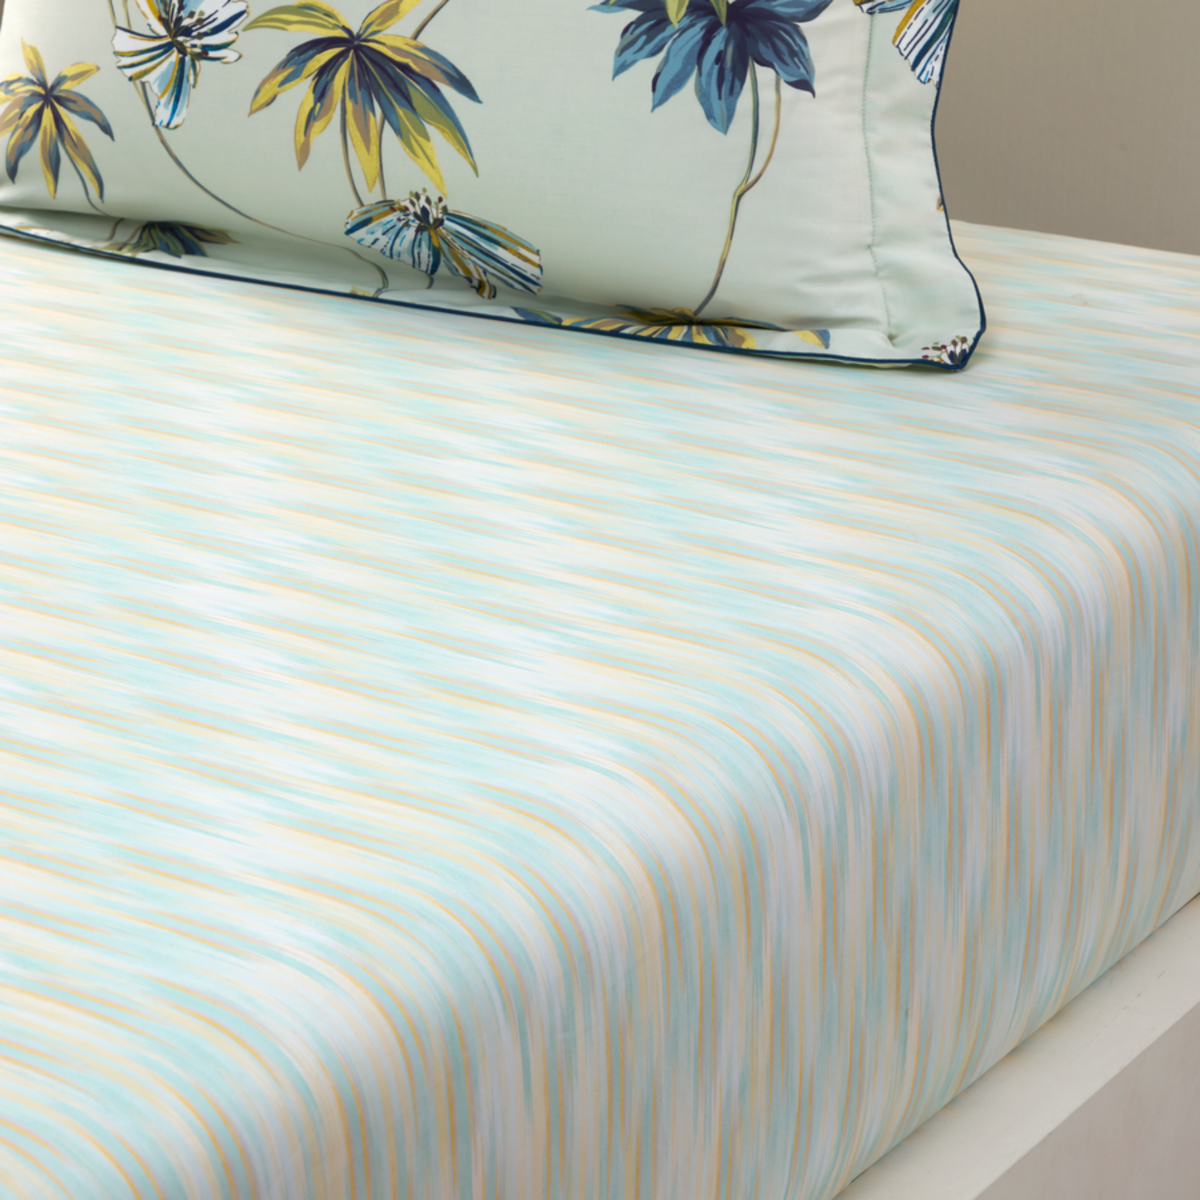 Fitted Sheet of Yves Delorme Grimani Bedding